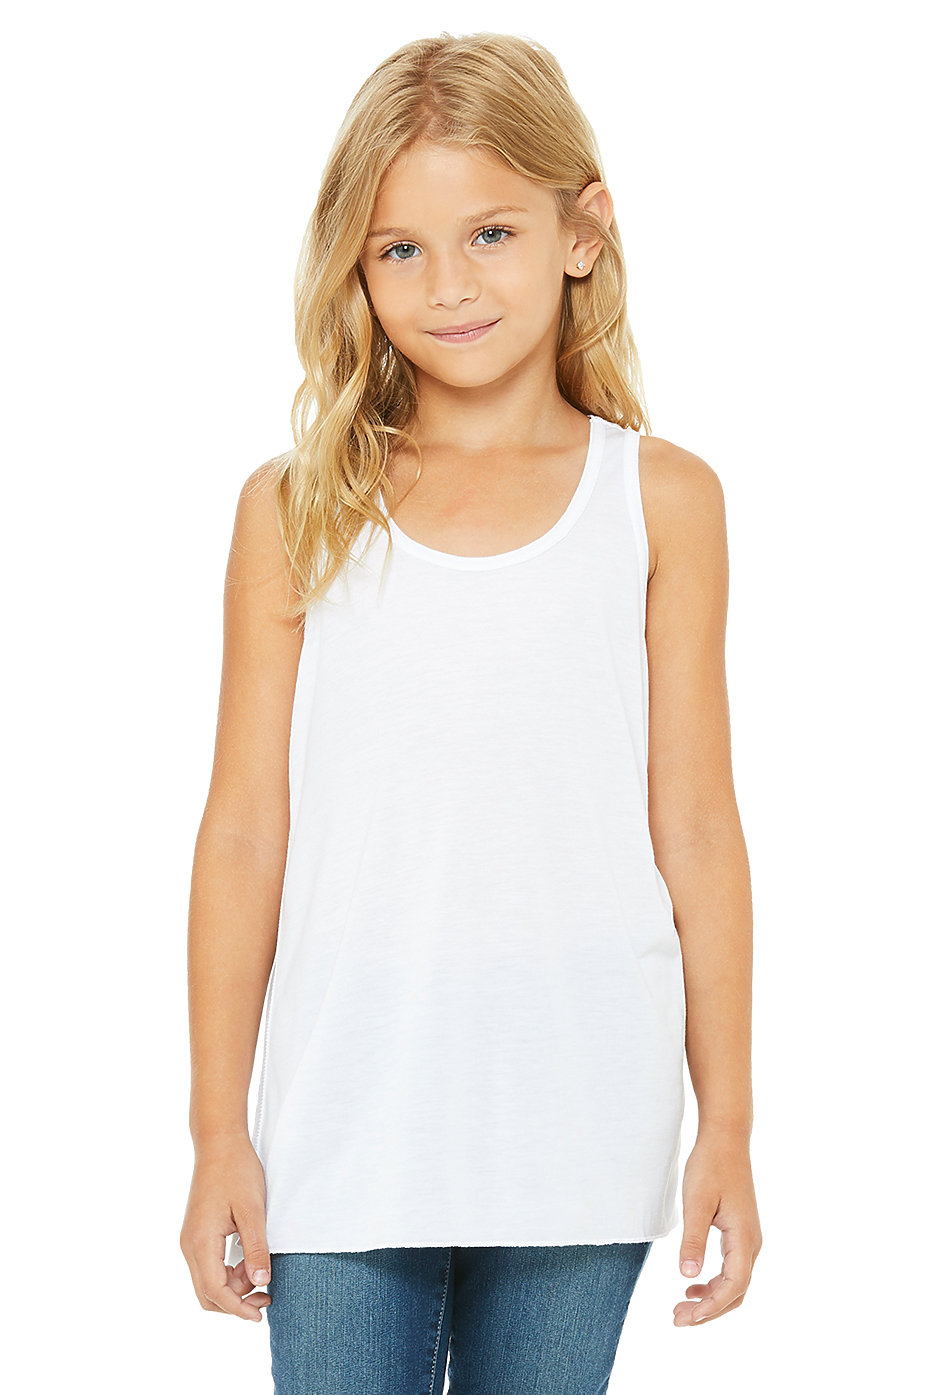 Youth Signature Tank Top